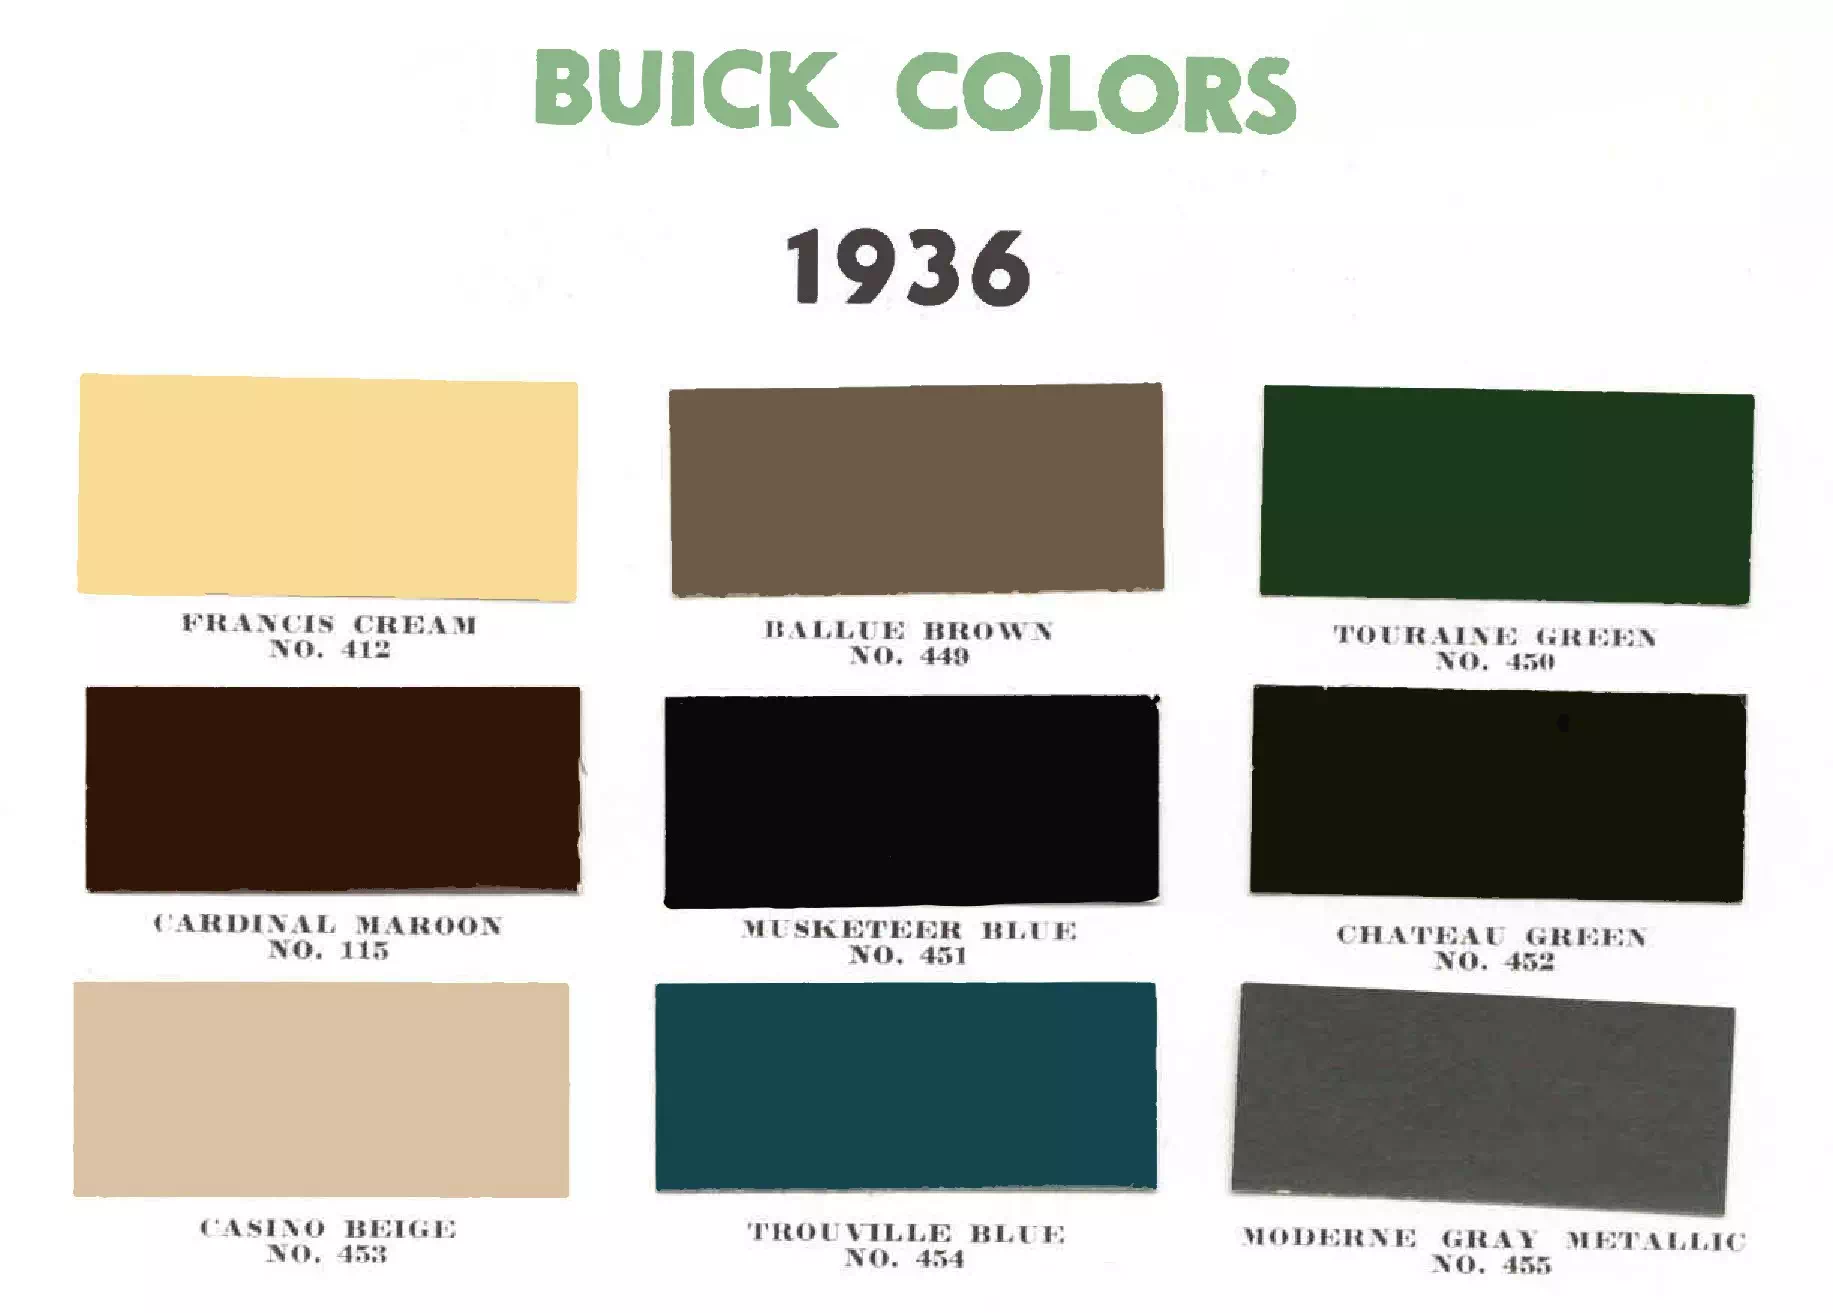 Colors used on Buick in 1936